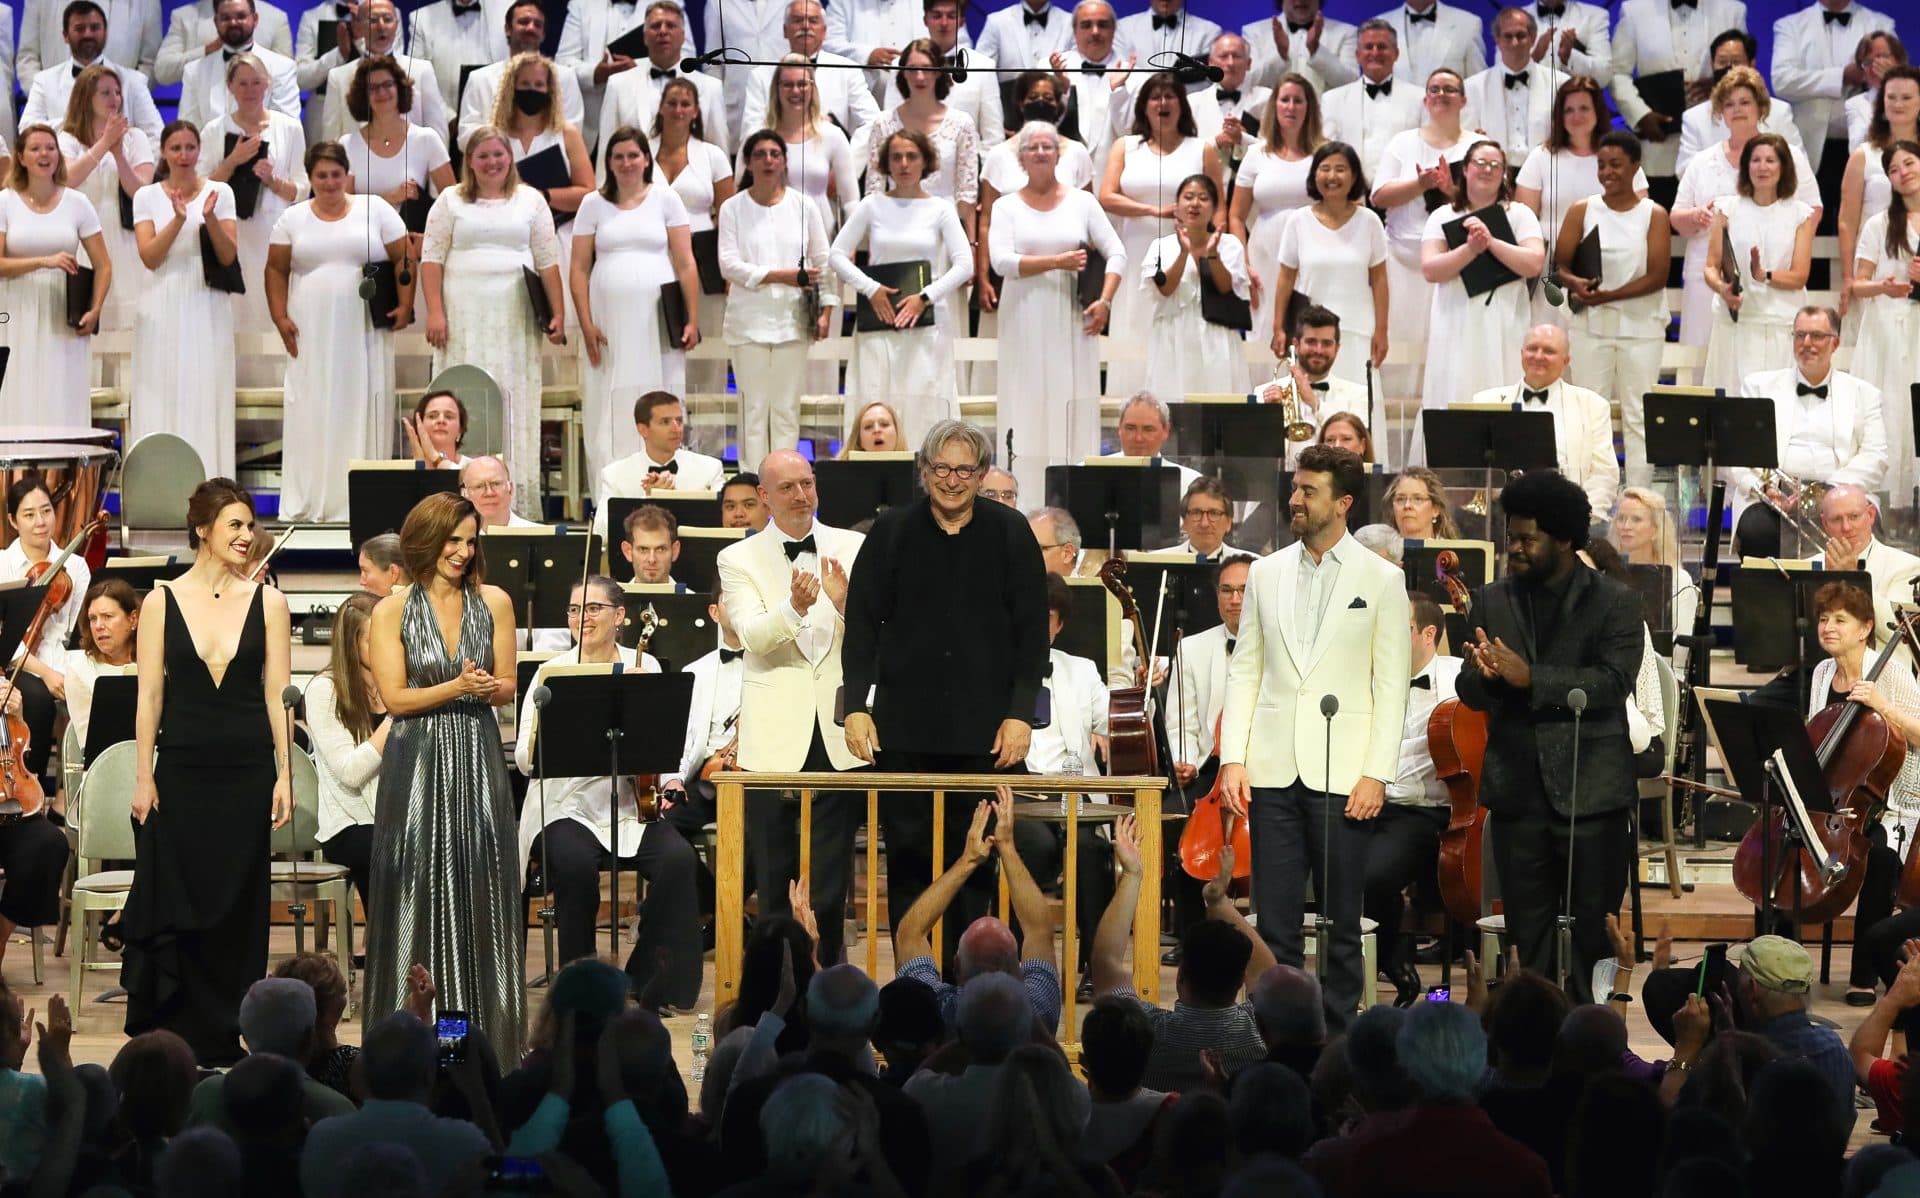 Michael Tilson Thomas (center) stands with the BSO and Tanglewood Festival Chorus during a standing ovation from the audience. (Courtesy Hannah Scott)